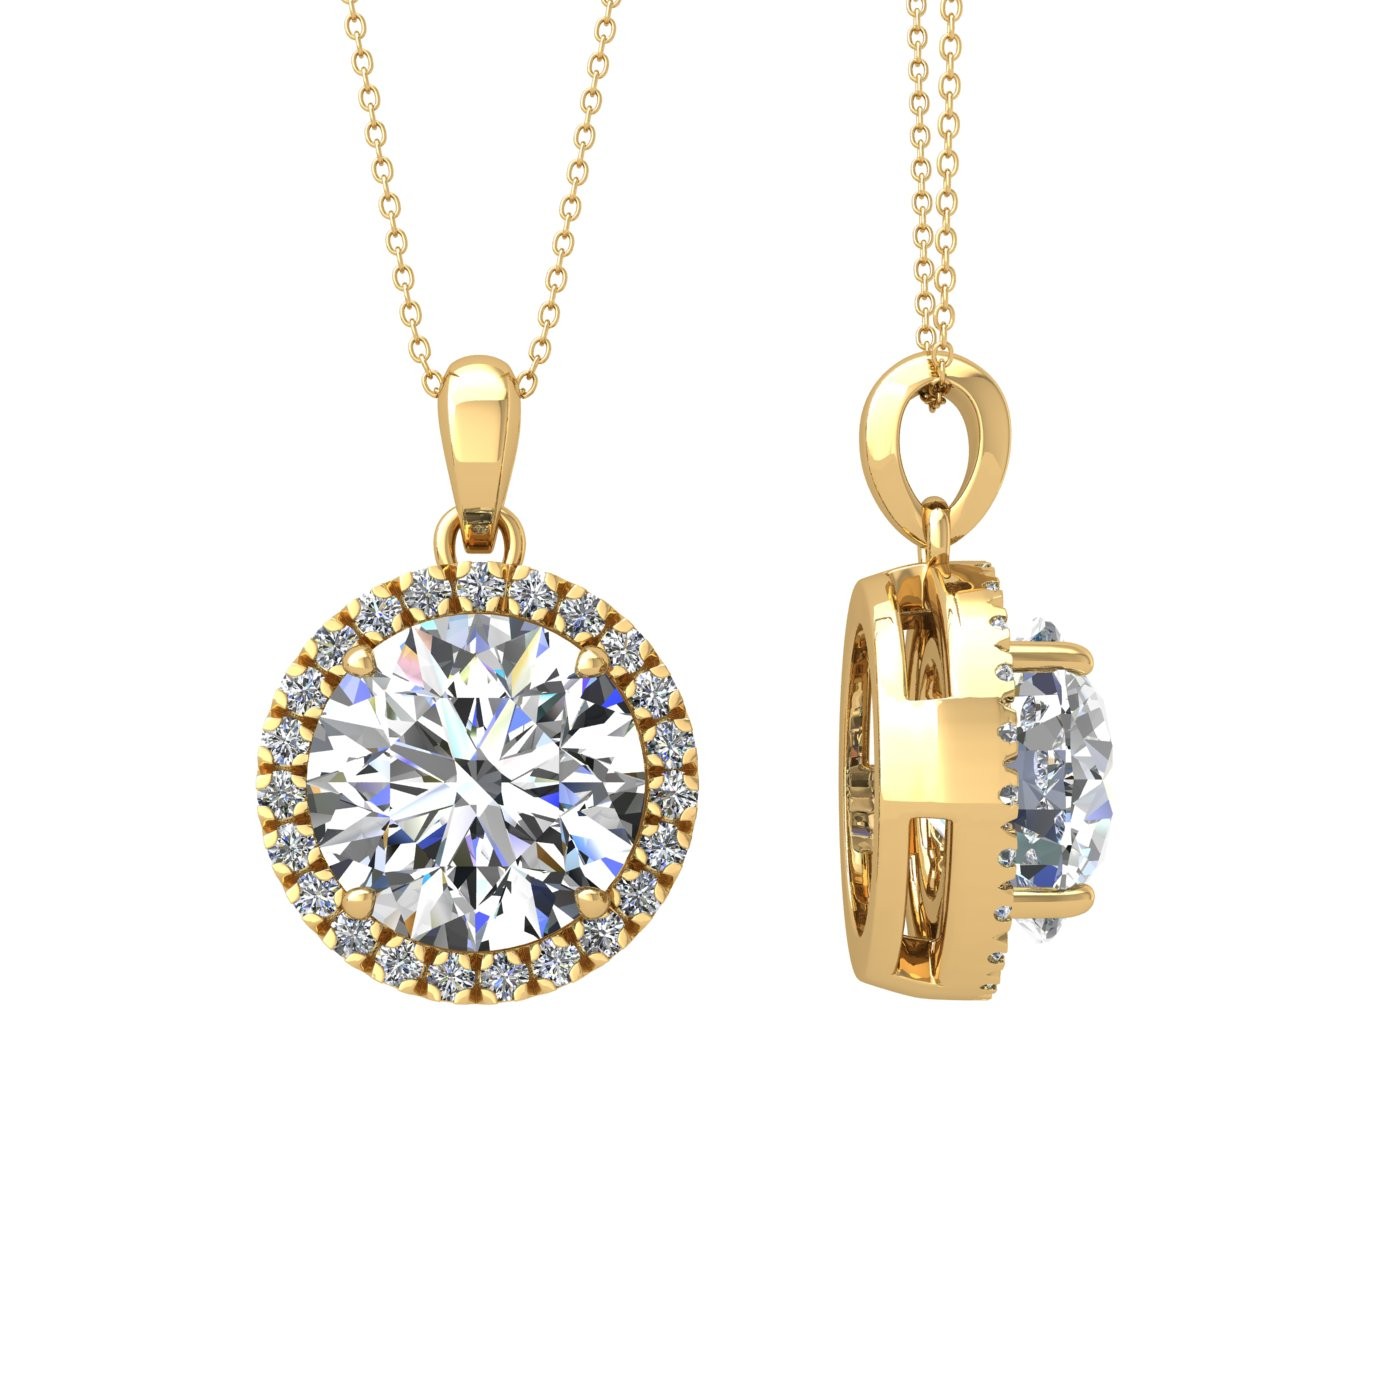 18k yellow gold 1 ct 4 prong round shape diamond pendant with diamond pavÉ set halo including chain seperate from the pendant Photos & images